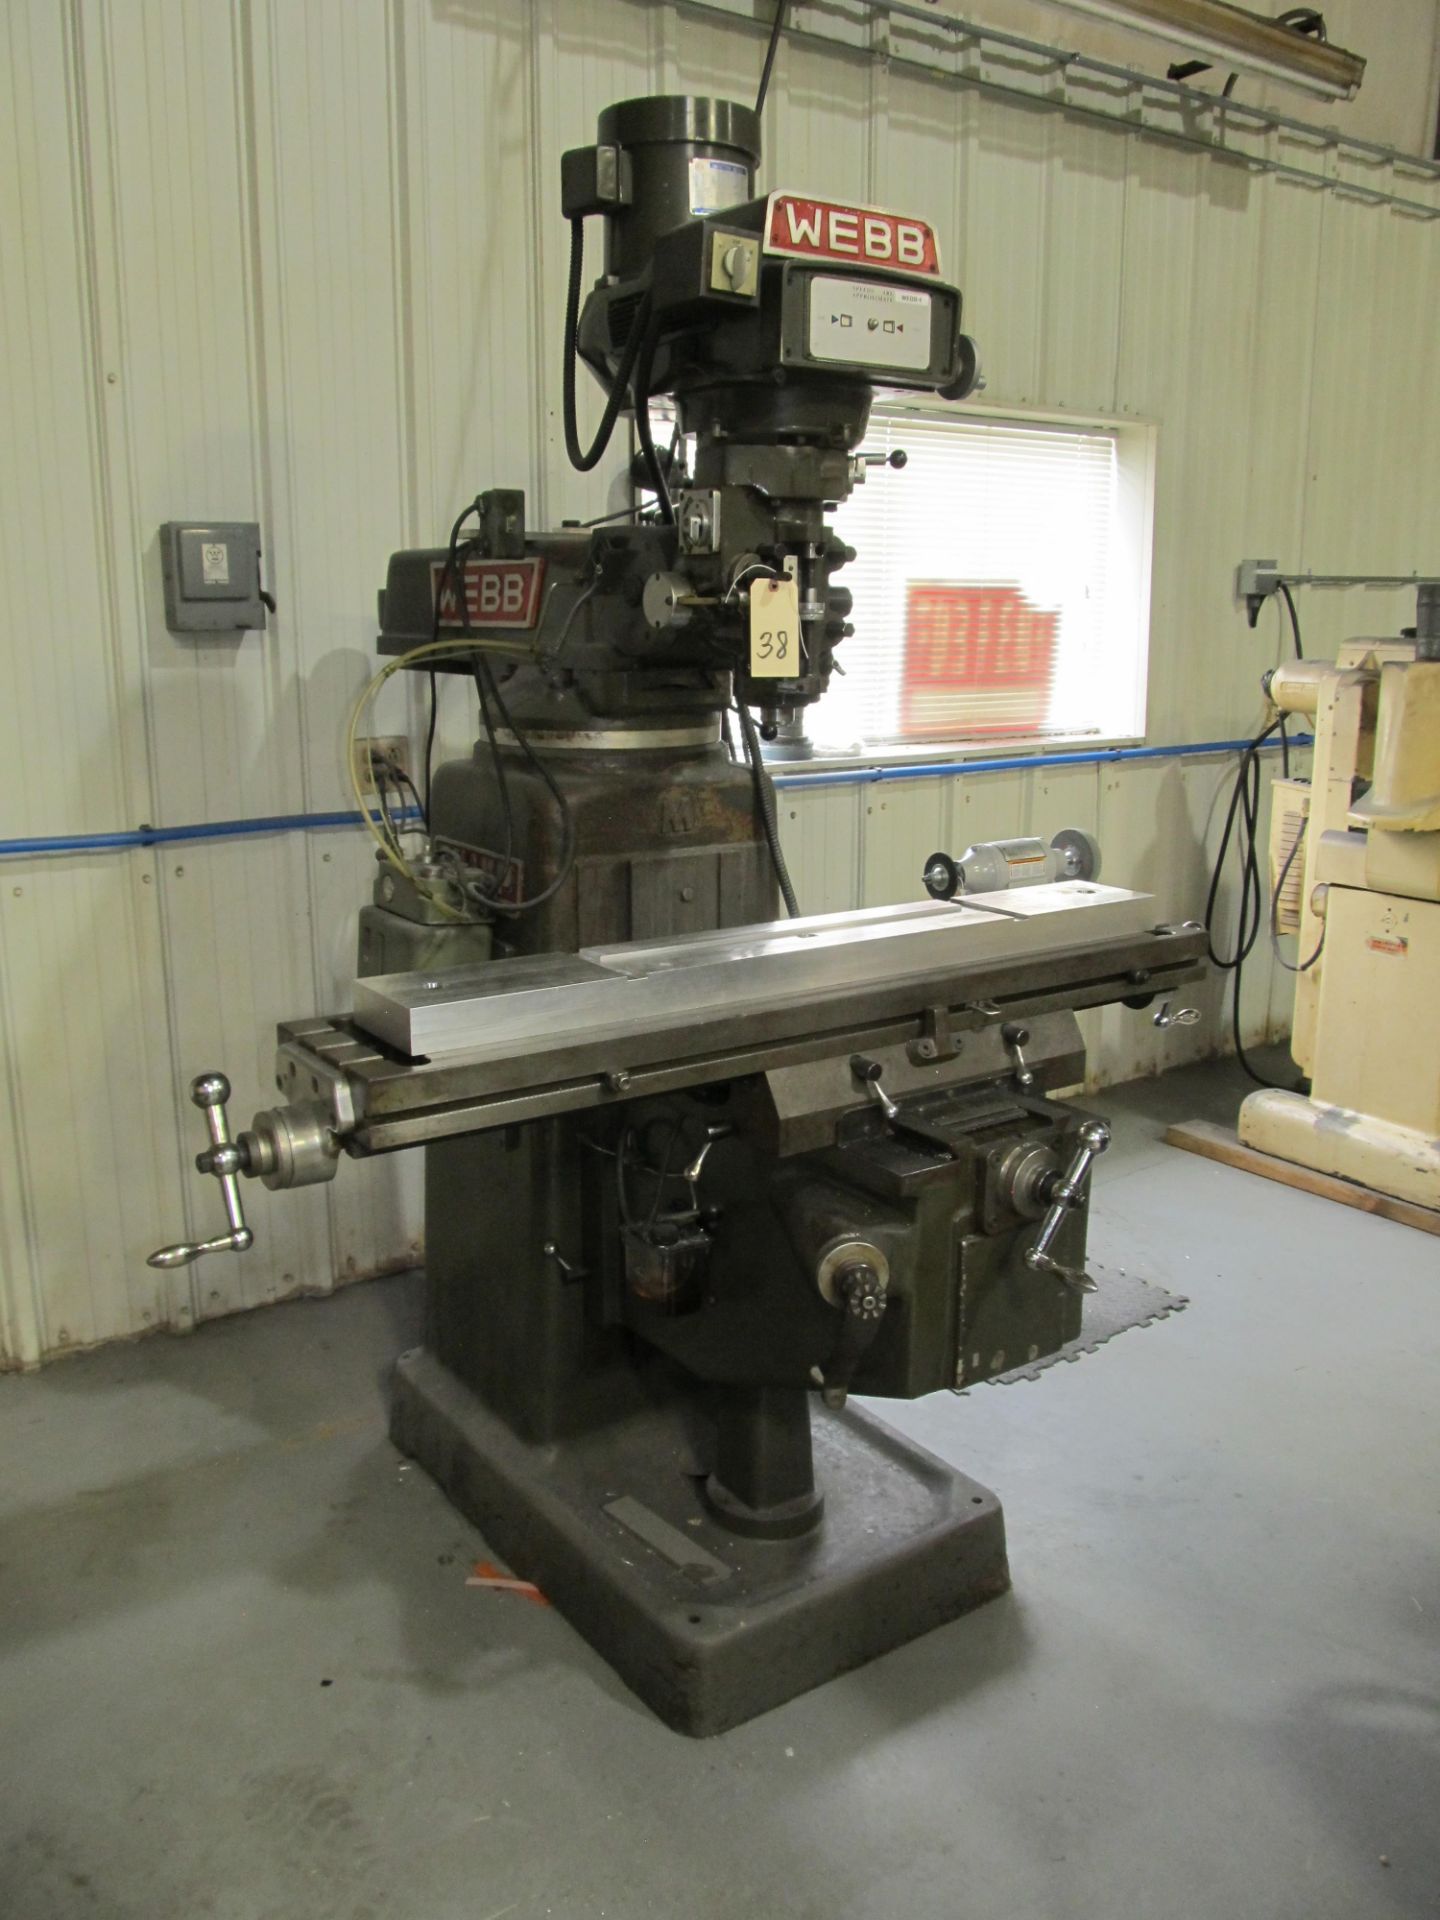 Webb/Champ Mdl.3VK 3-Axis Milling Machine w/ Knee Type 10" x 50" Table - Image 2 of 8